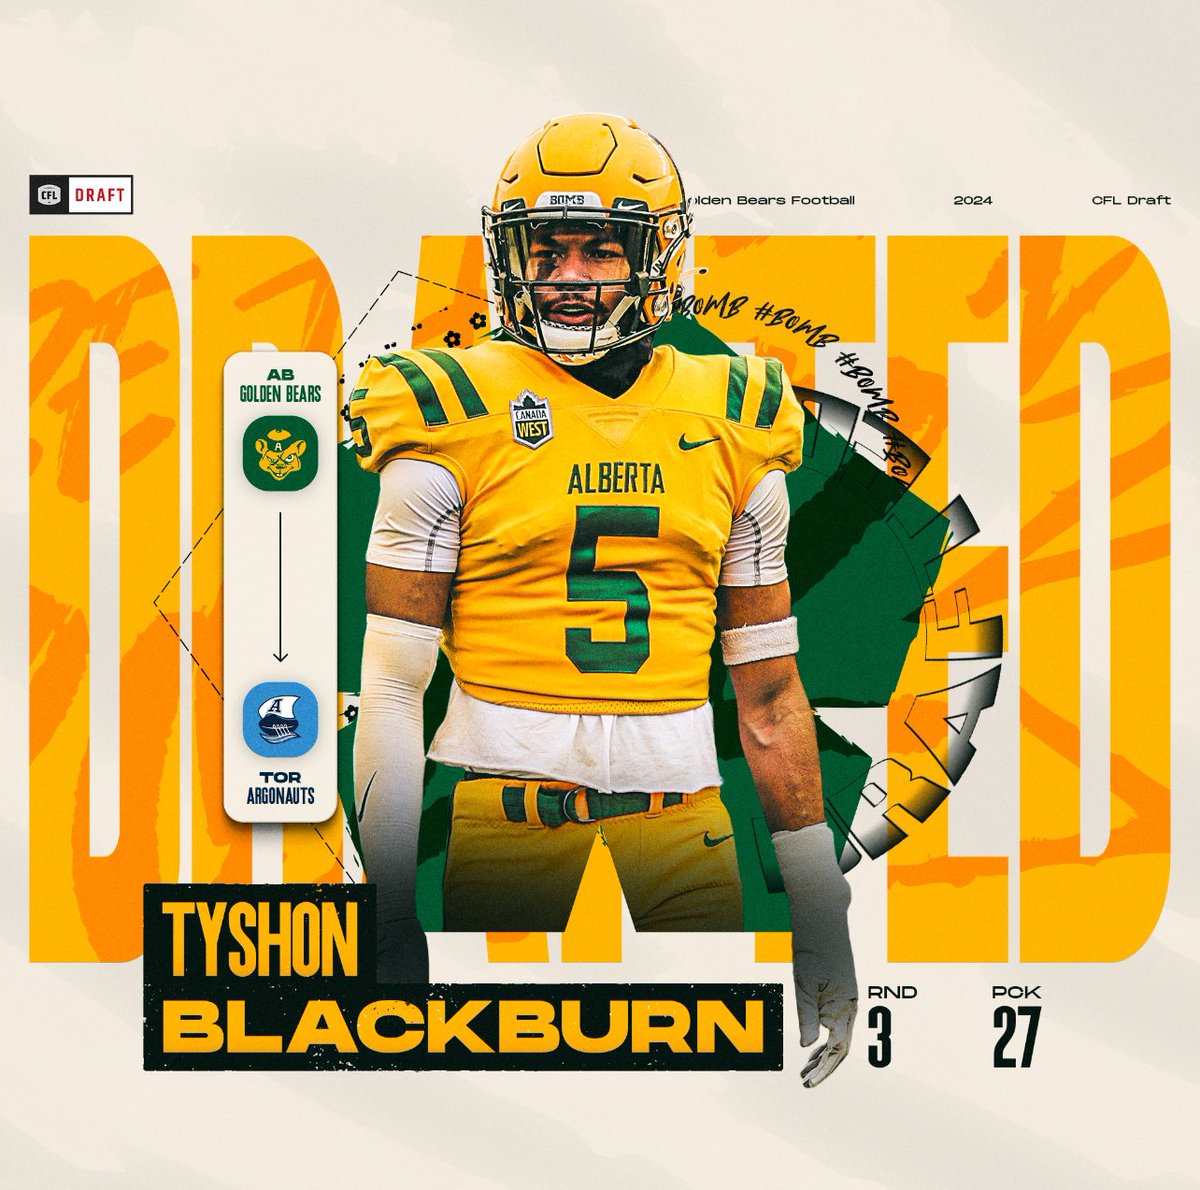 Congratulations to Golden Bear Football’s Tyshon Blackburn! The 27th overall pick in the CFL Draft.